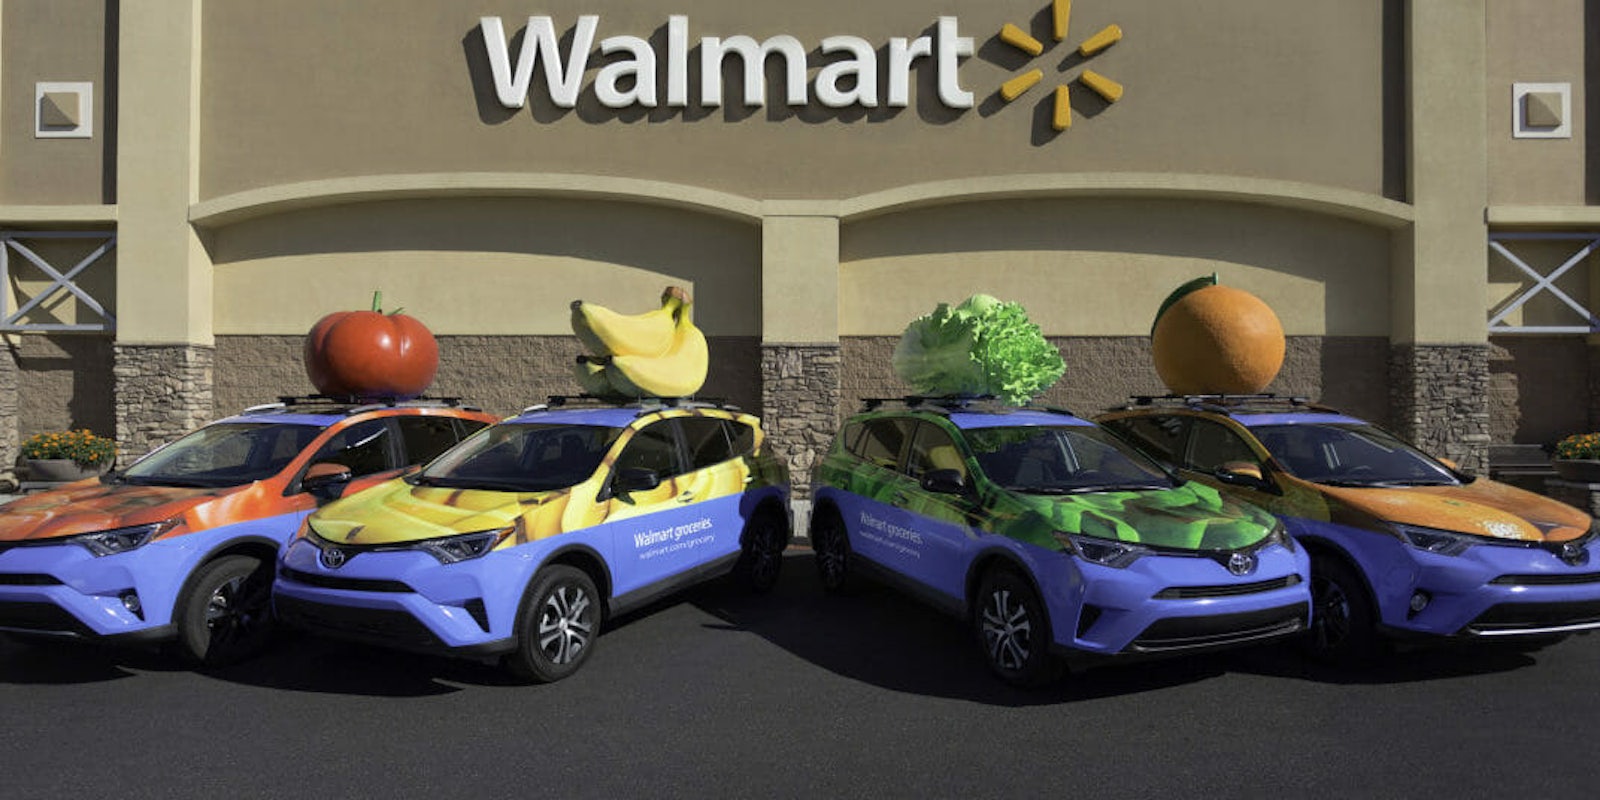 Walmart grocery deliveries vehicles, which are purple with fruit atop their roofs